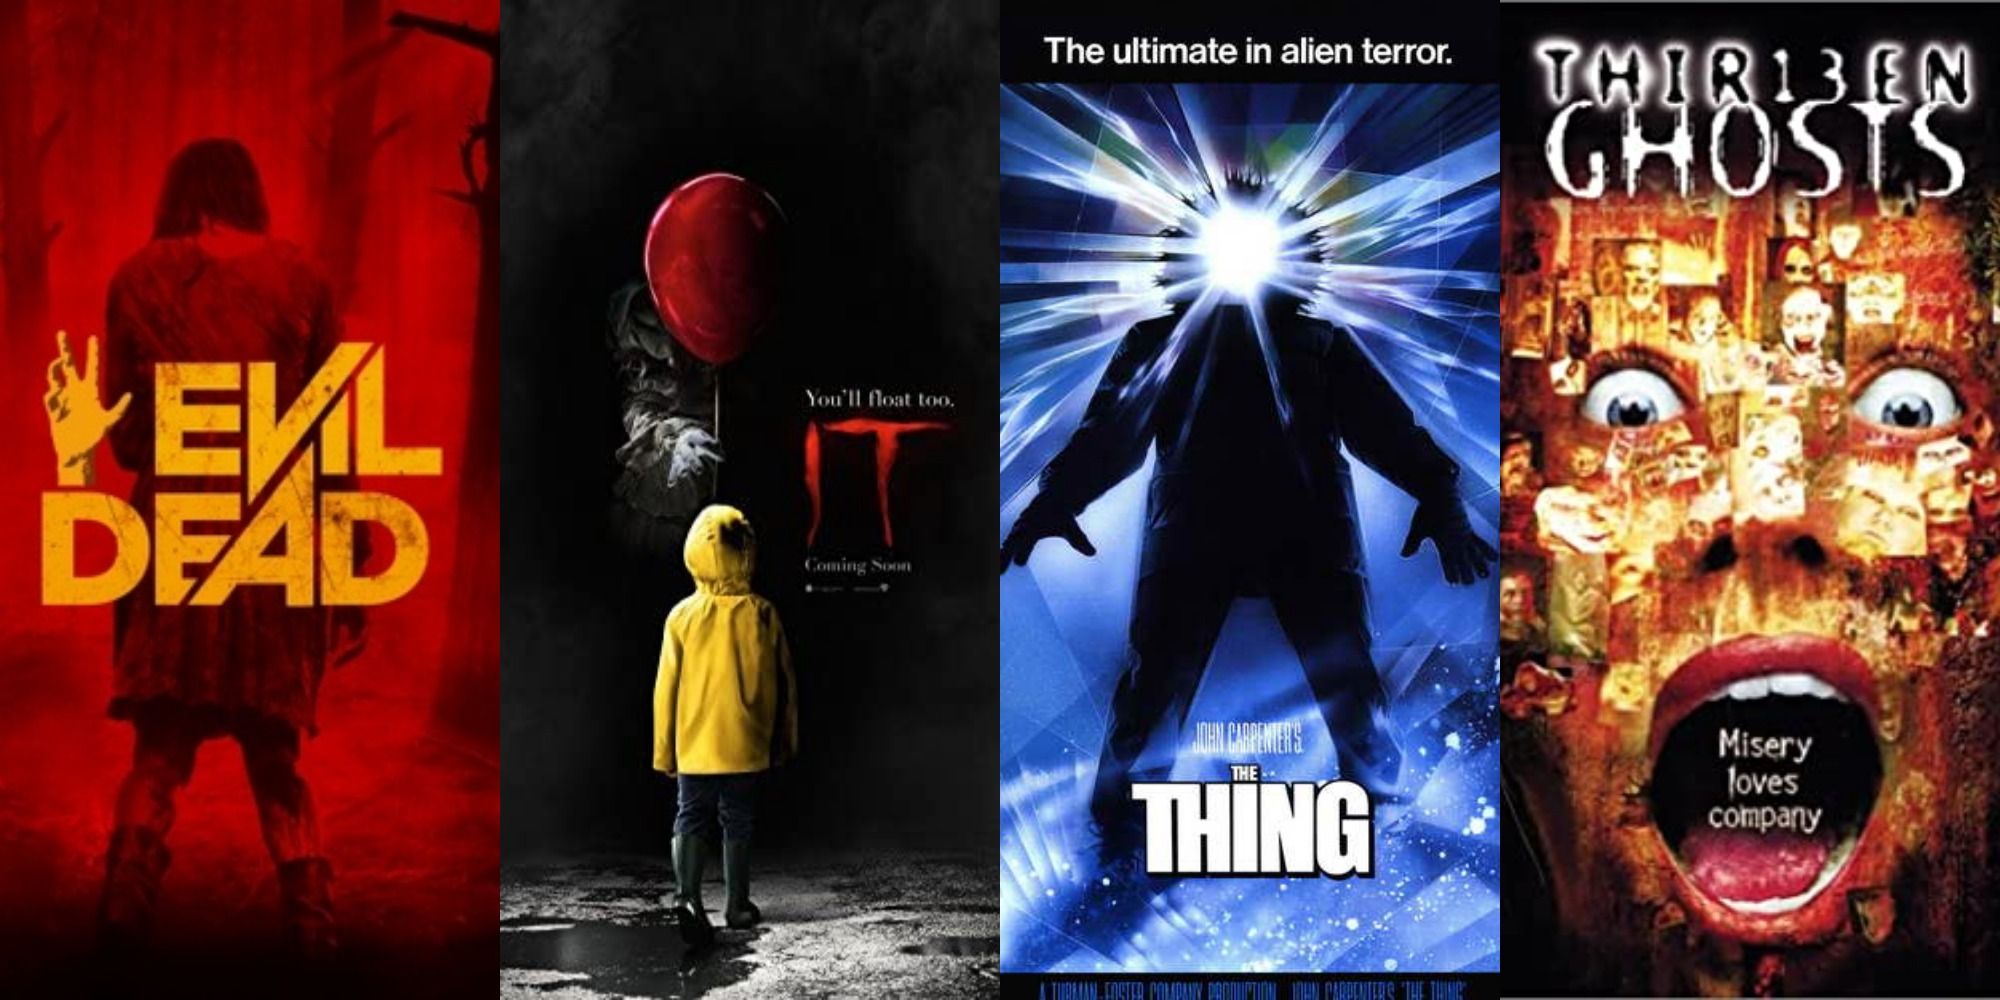 (From left to right) Evil Dead, IT, The Thing, 13 Ghosts